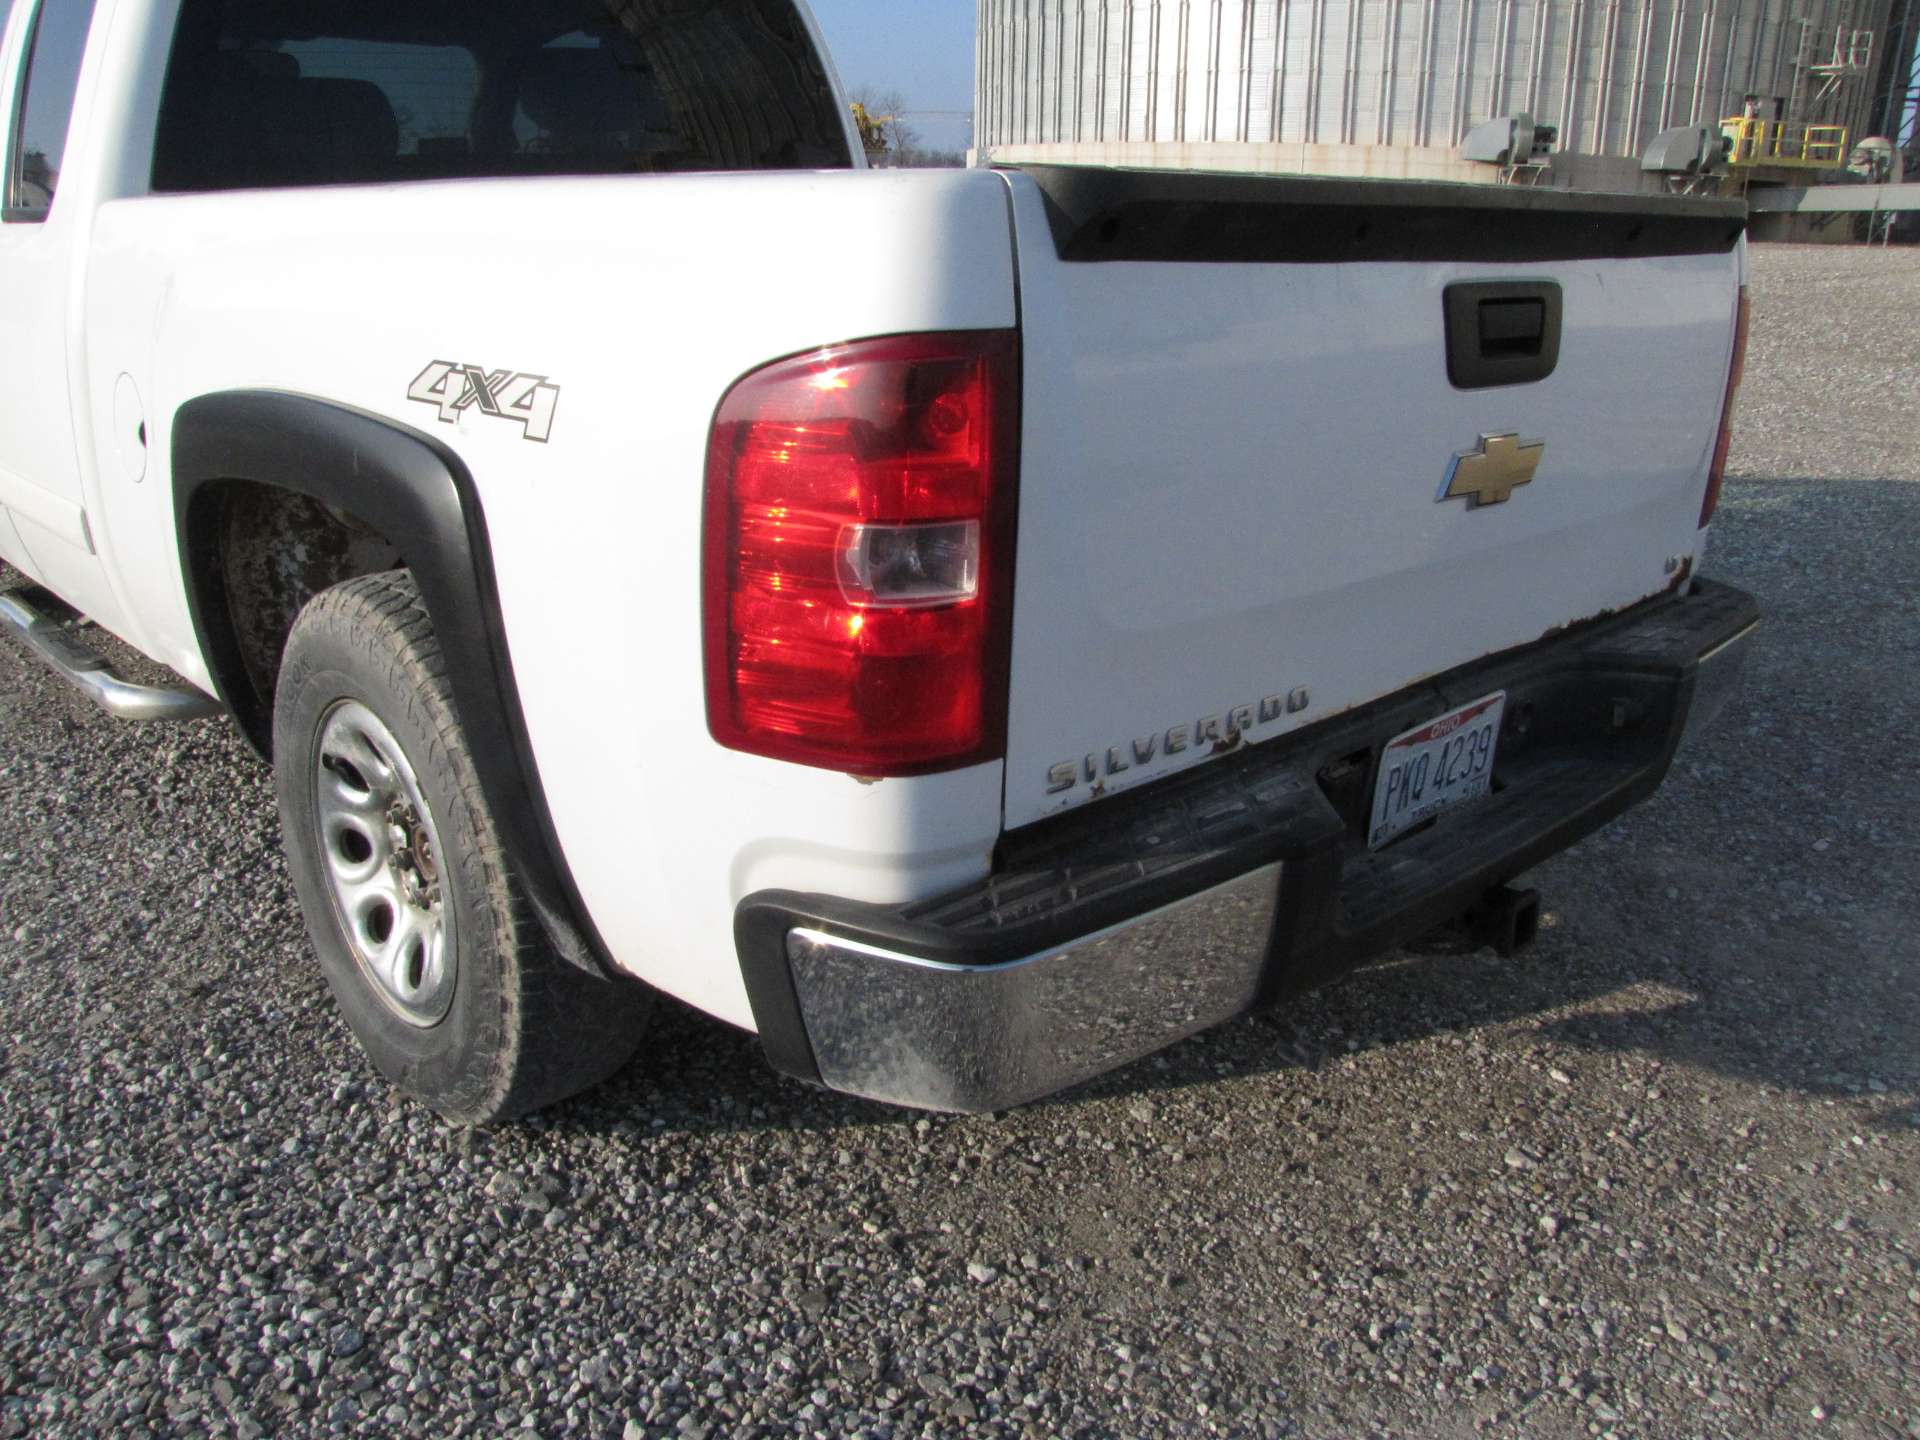 2008 Chevy Silverado 1500 LT Pickup Truck (CRACKED FRAME) - Image 22 of 43